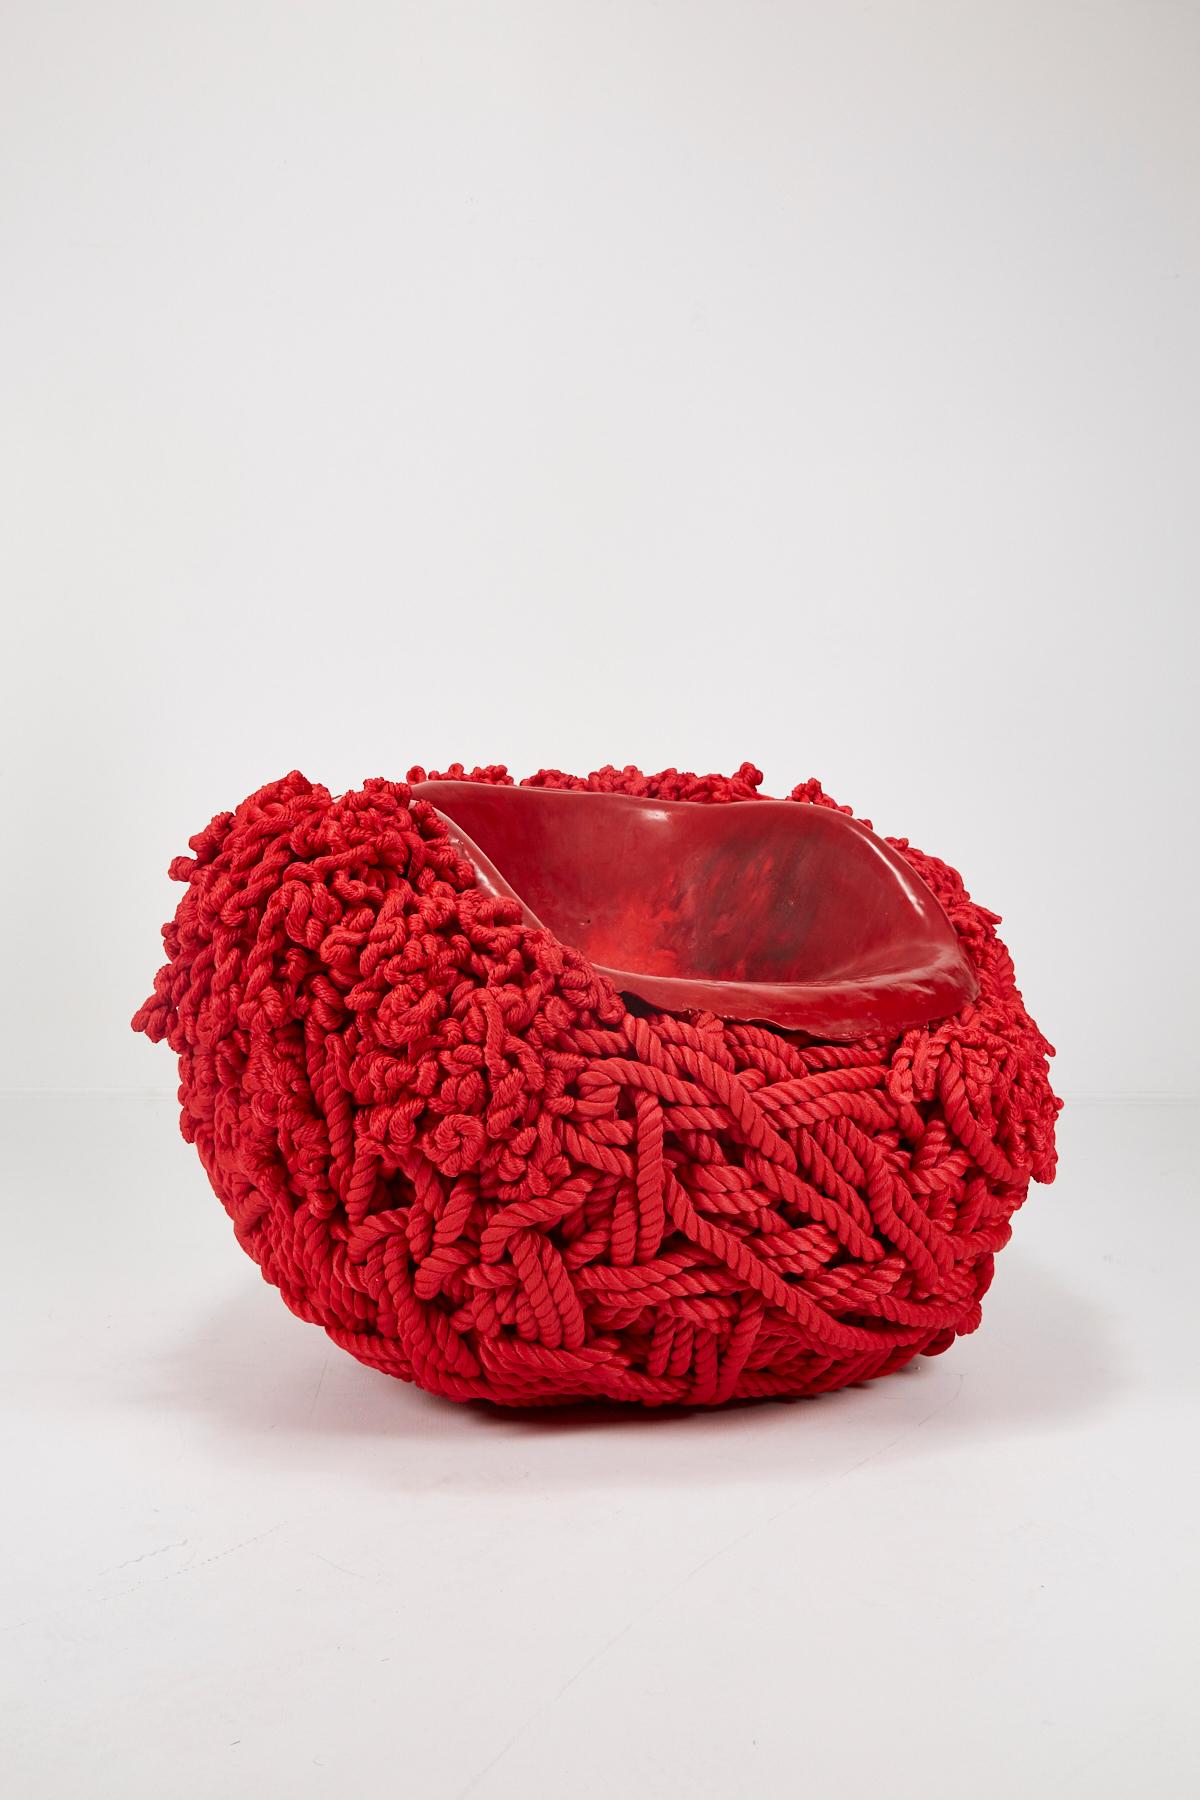 Contemporary Meltdown Chair Pp Rope Red by Tom Price, 2017